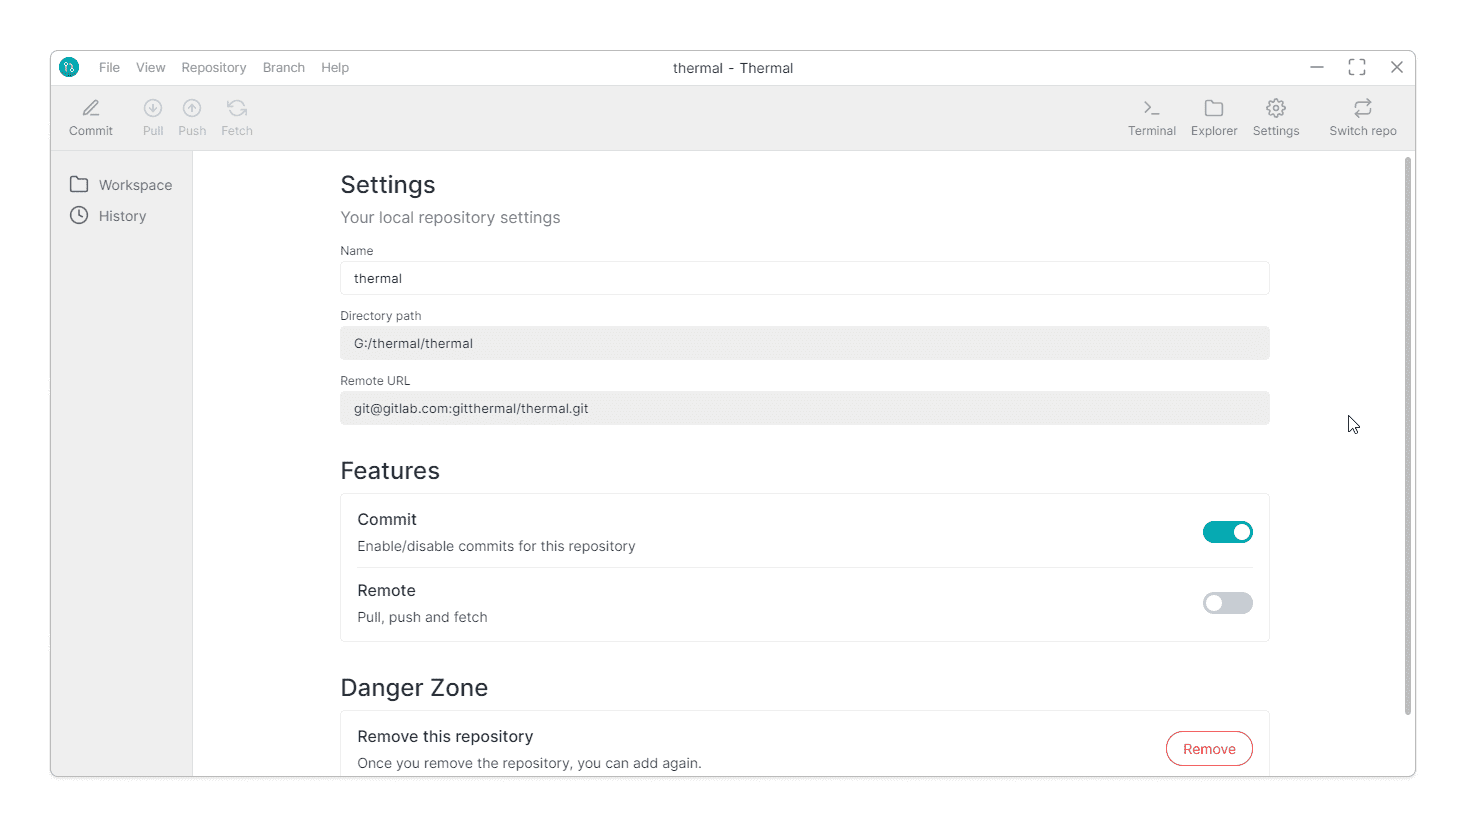 Repository settings page